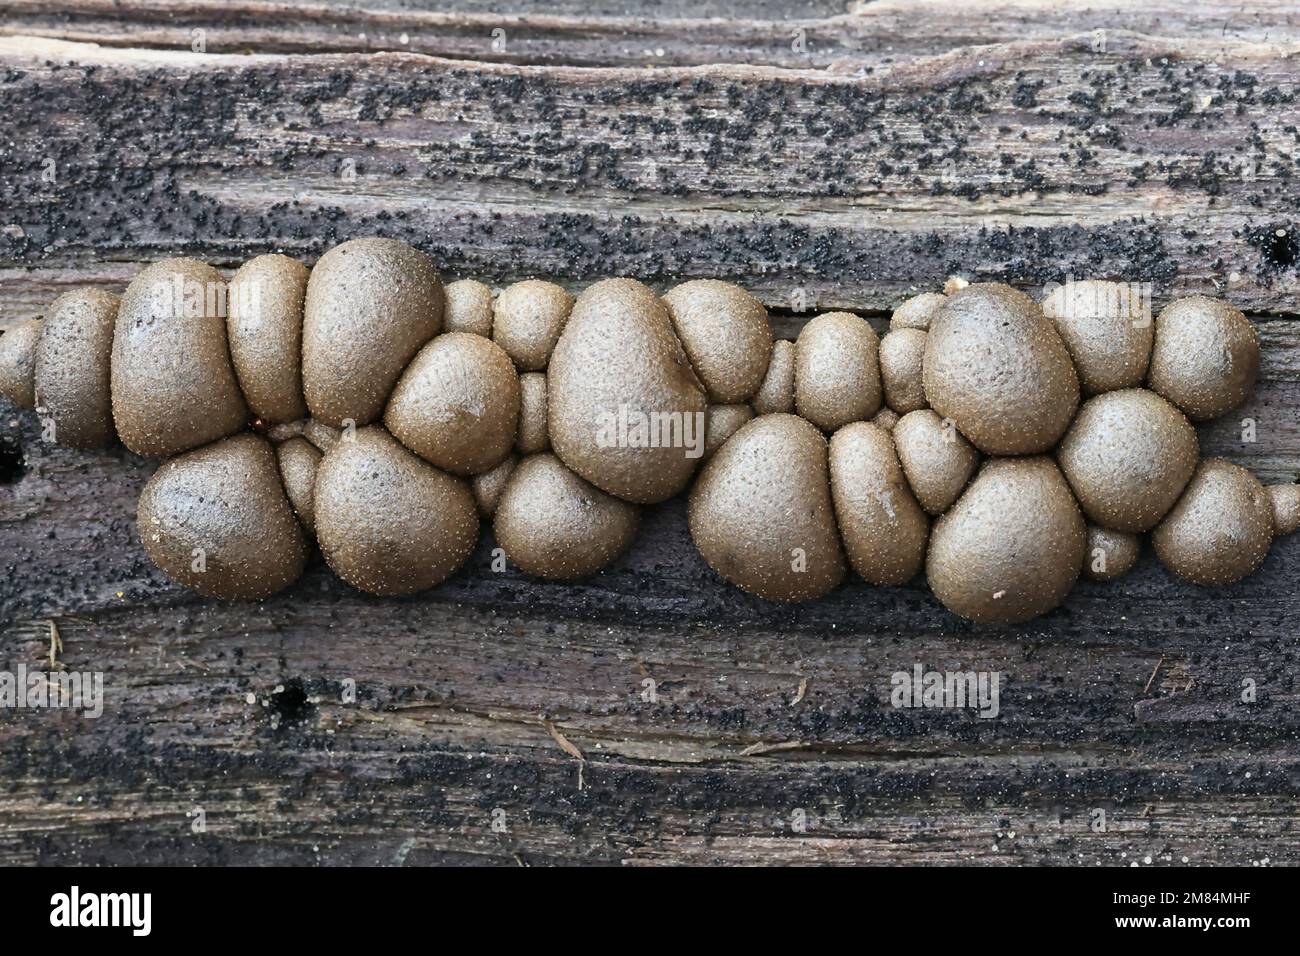 Lycogala epidendrum, commonly known as wolf's milk, groening's slime mold, aethalia or fruiting bodies on decaying wood Stock Photo